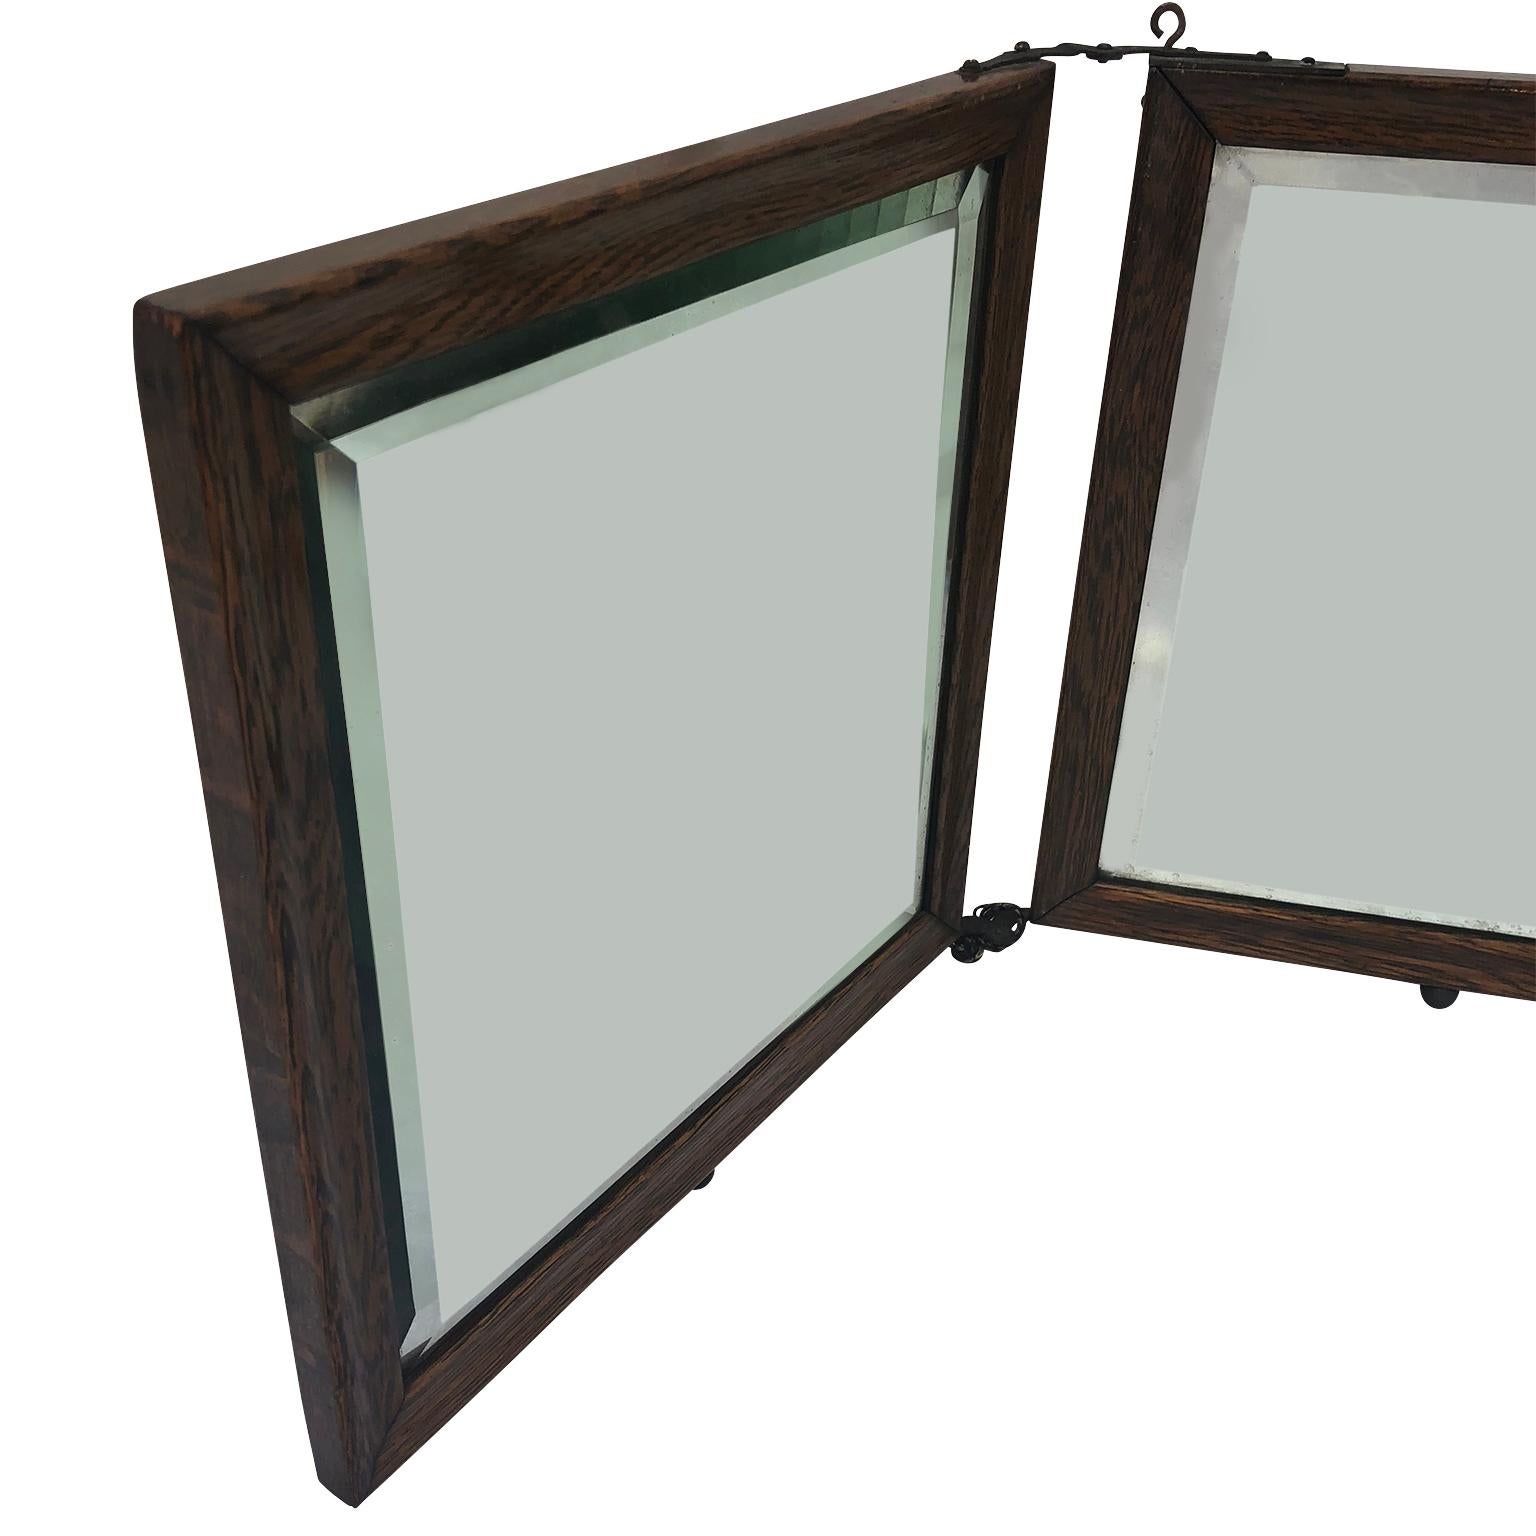 Tri-Fold Travel Vanity or Dresser Mirror with Beveled Glass In Good Condition For Sale In Haddonfield, NJ